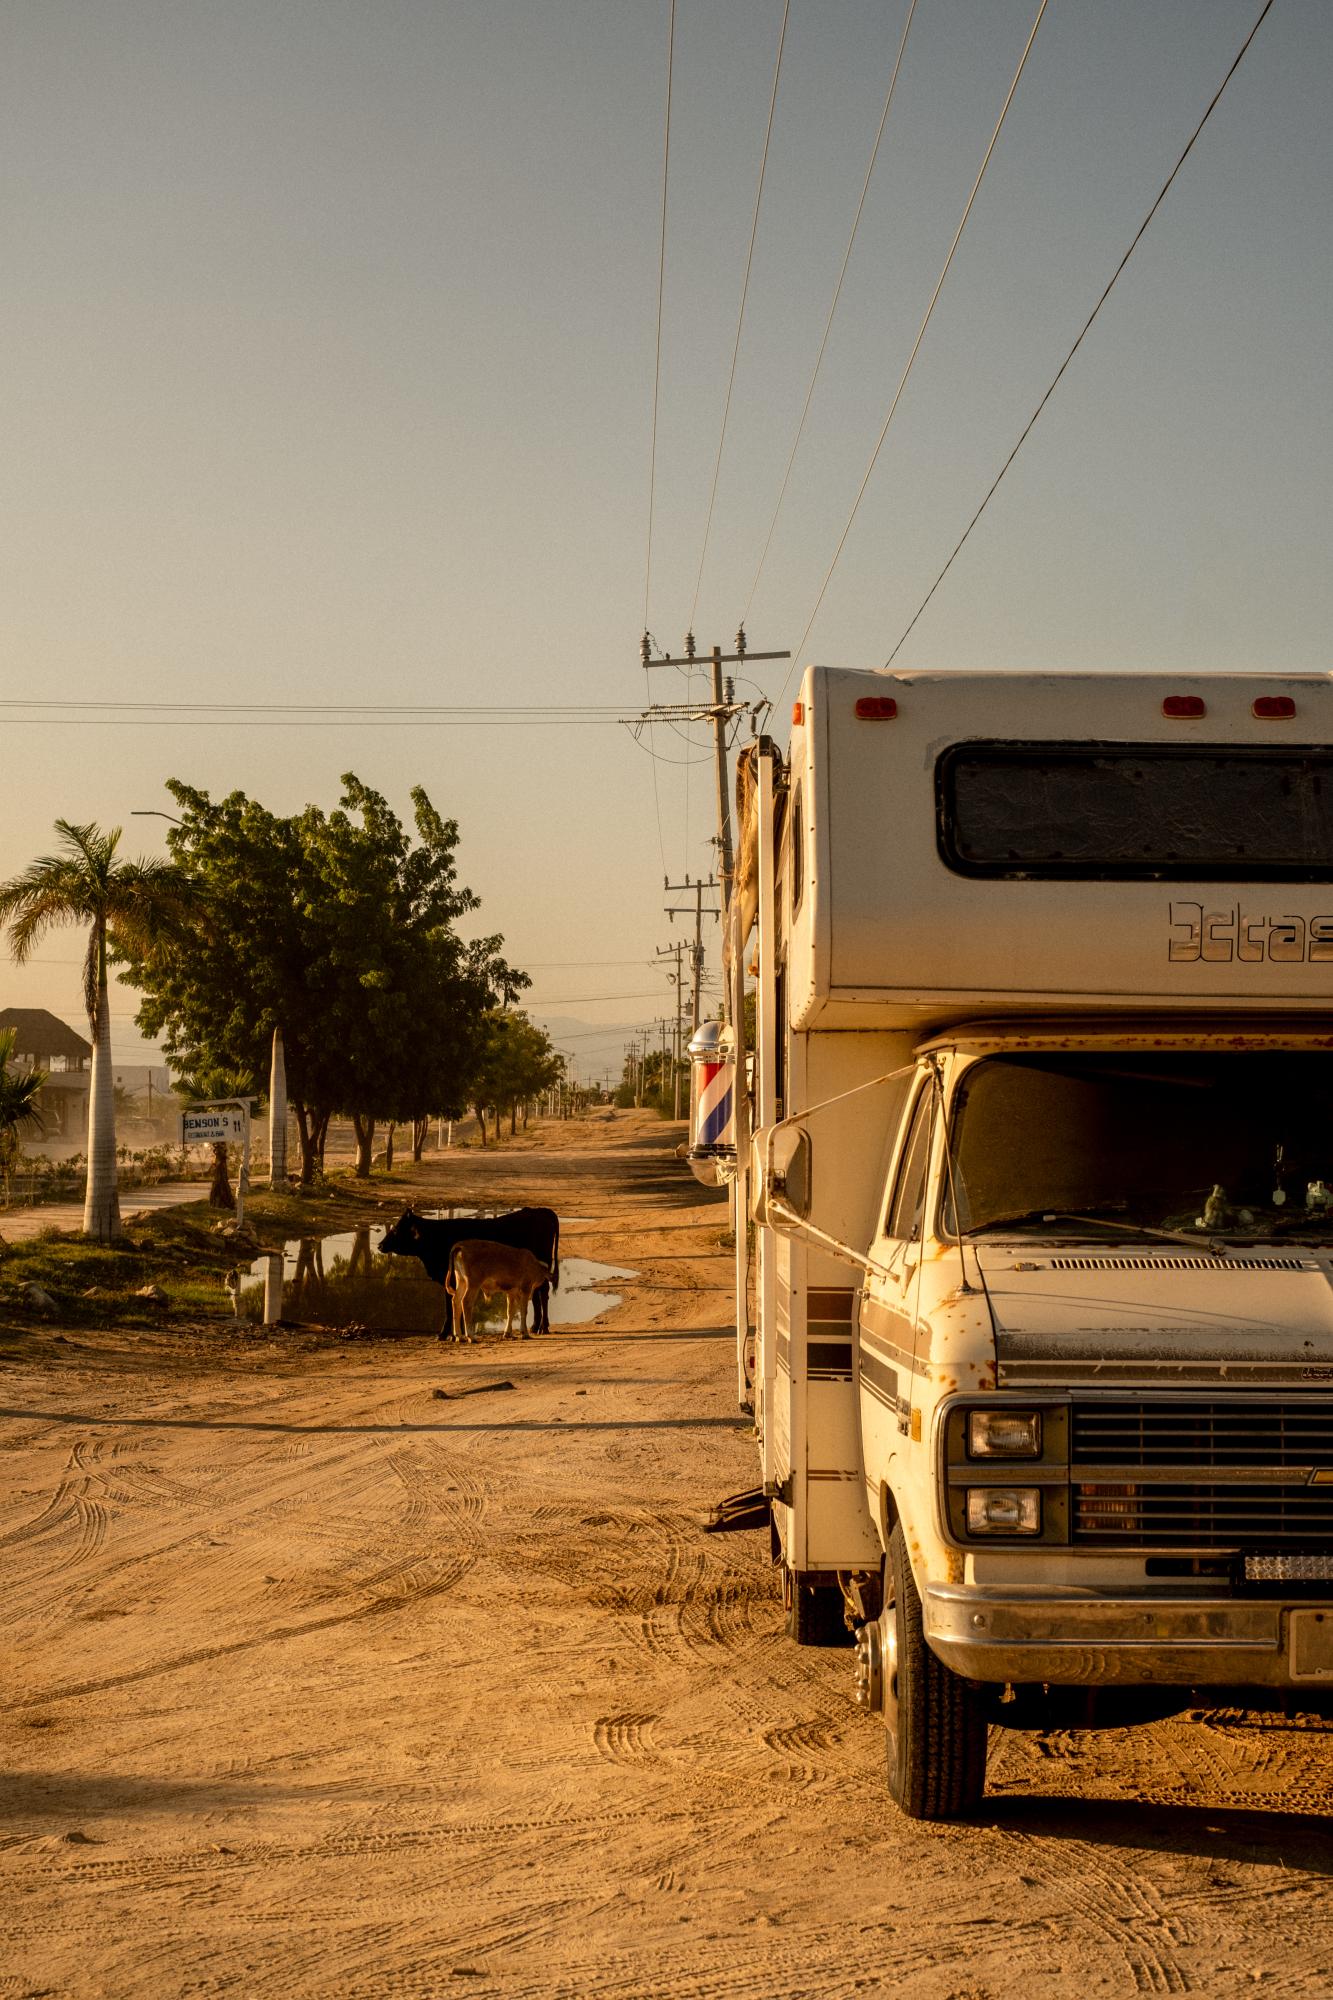 A Warm Winter (An Ongoing Journey) - Diego's rig and barber shop parked in La Ventana, Baja...